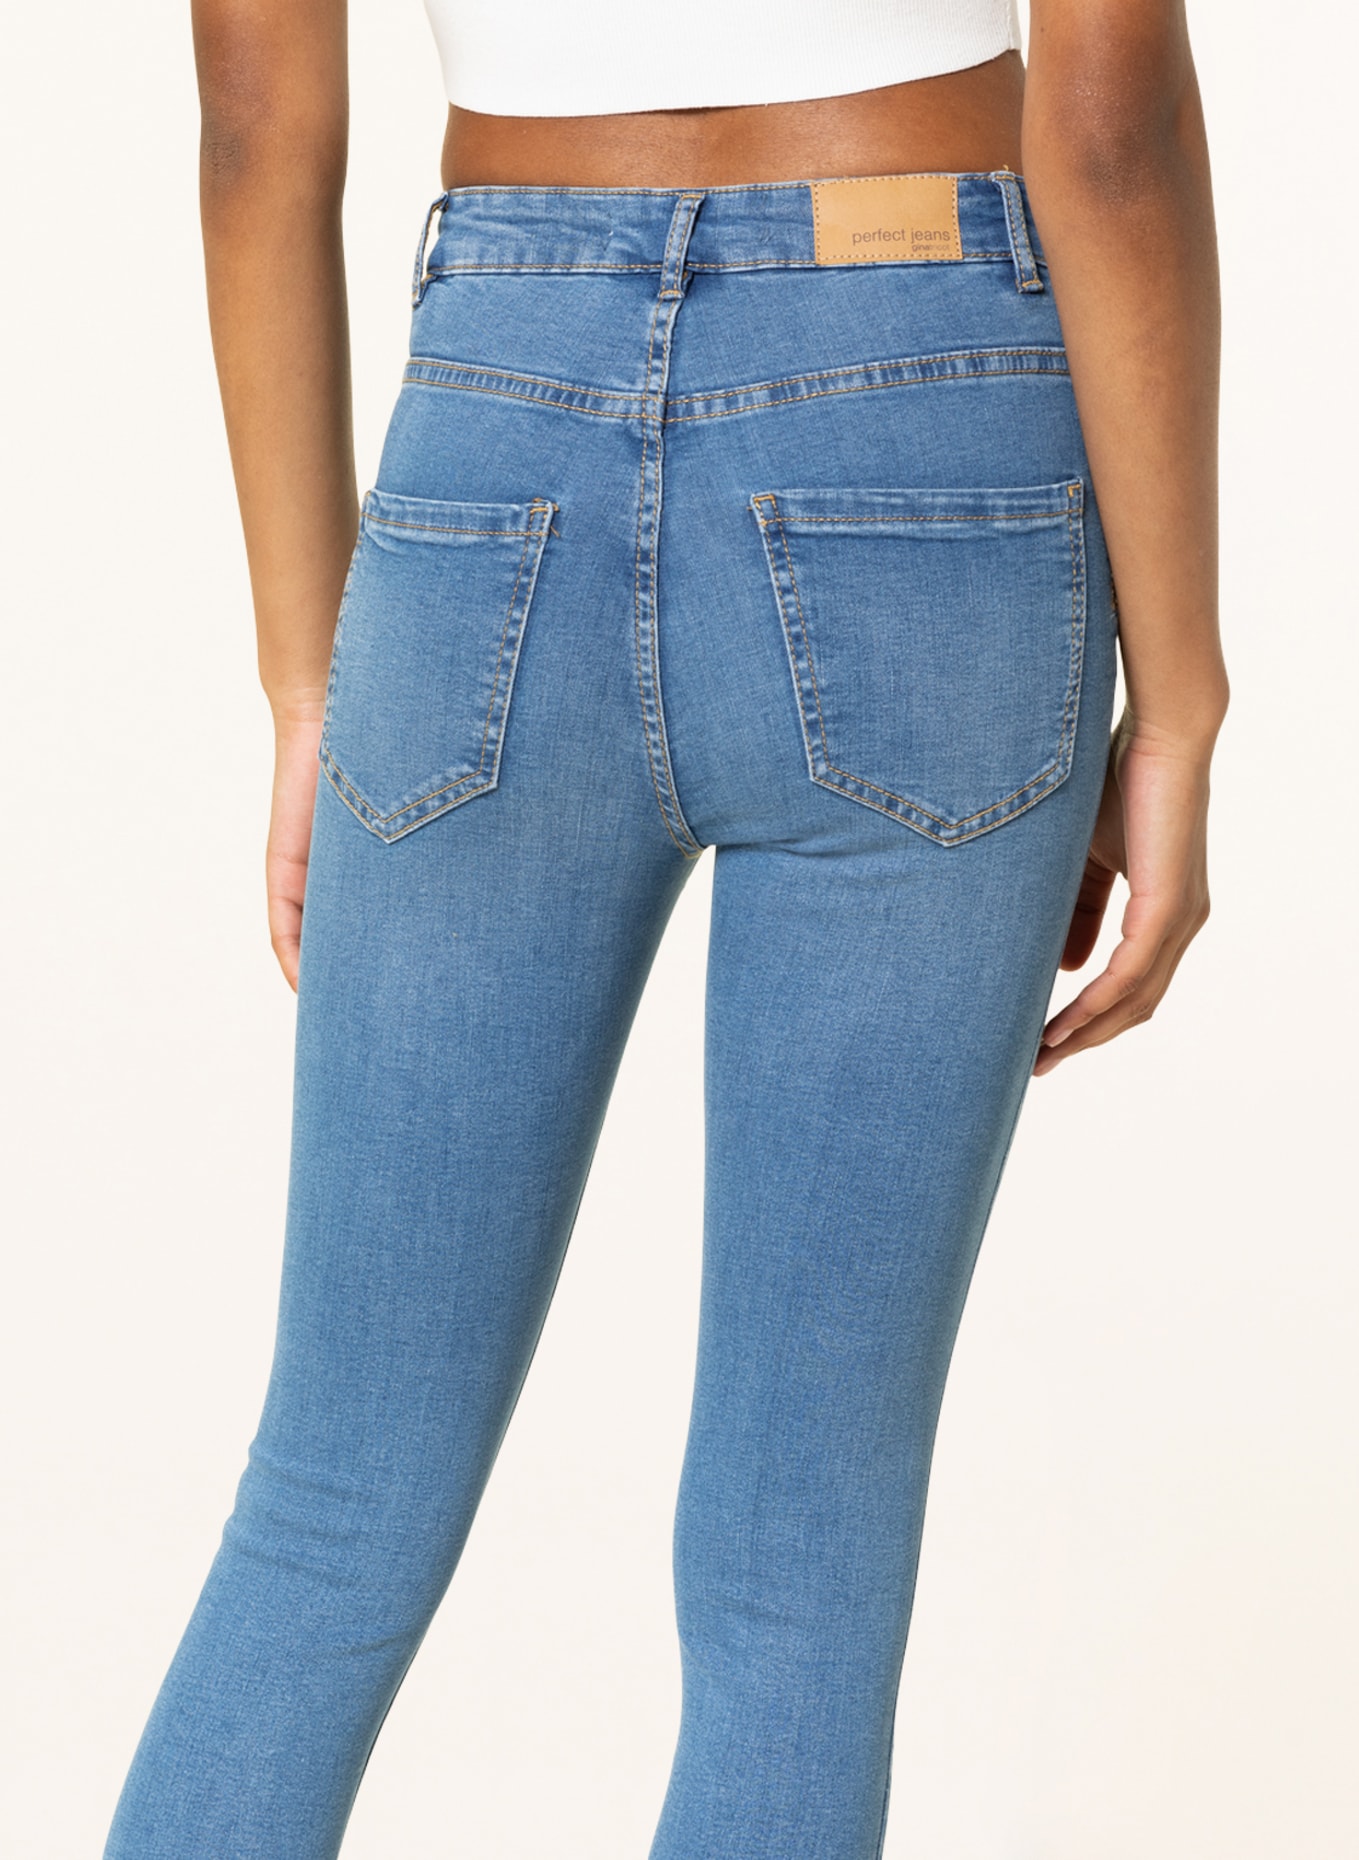 gina tricot Skinny jeans MOLLY, Color: 5545 mid blue g (Image 5)